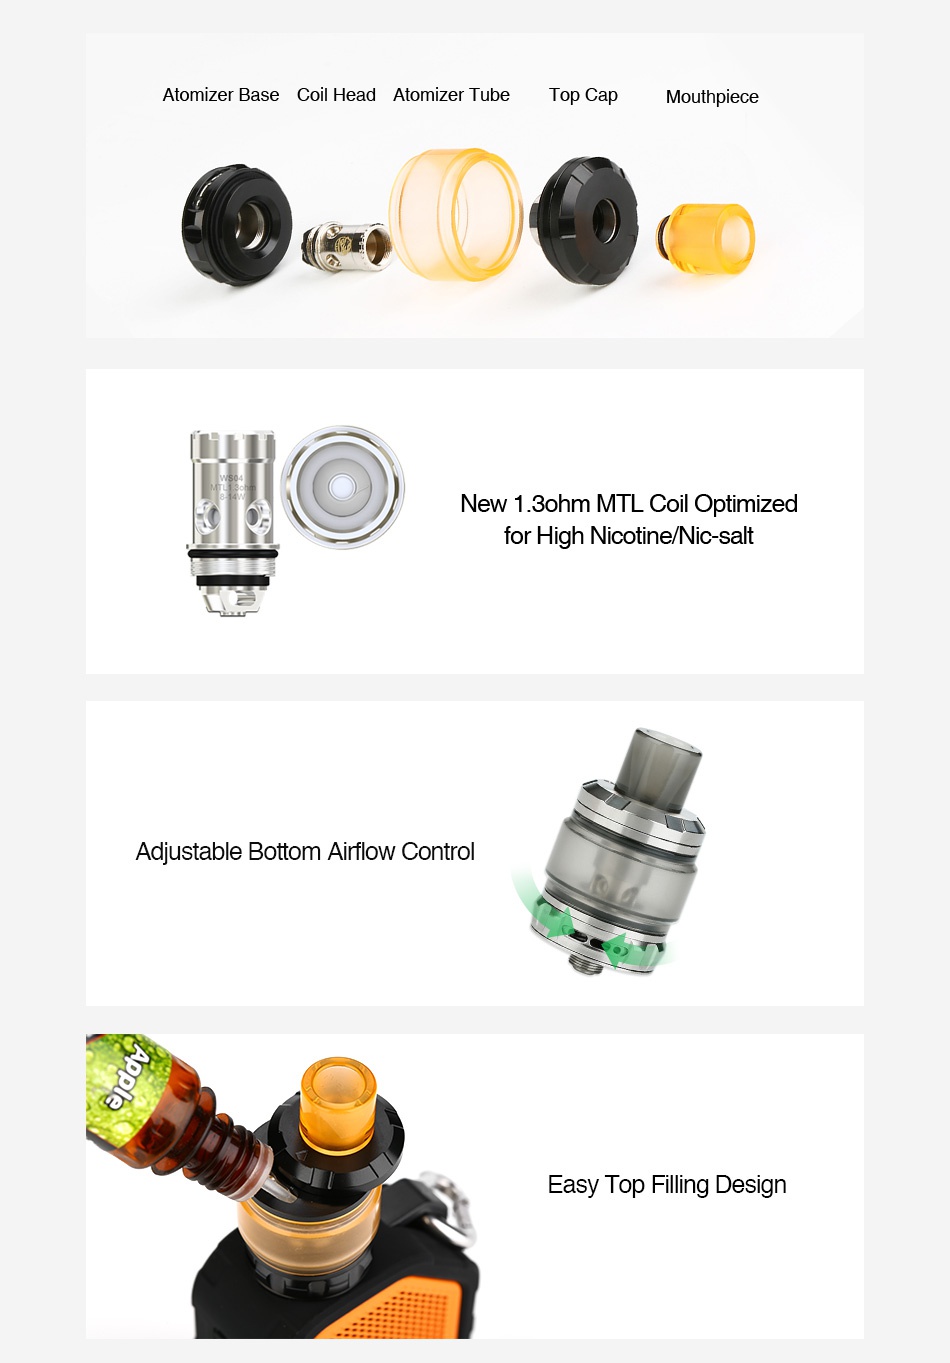 WISMEC Amor NS Plus Atomizer 2ml/4.5ml tomizer Base Col Head Atomizer Tube Top Cap    New 1 ohm MTL Coil Optimized for high nicotine Nic salt Adjustable Bottom Airflow Control Easy Top Filling Design